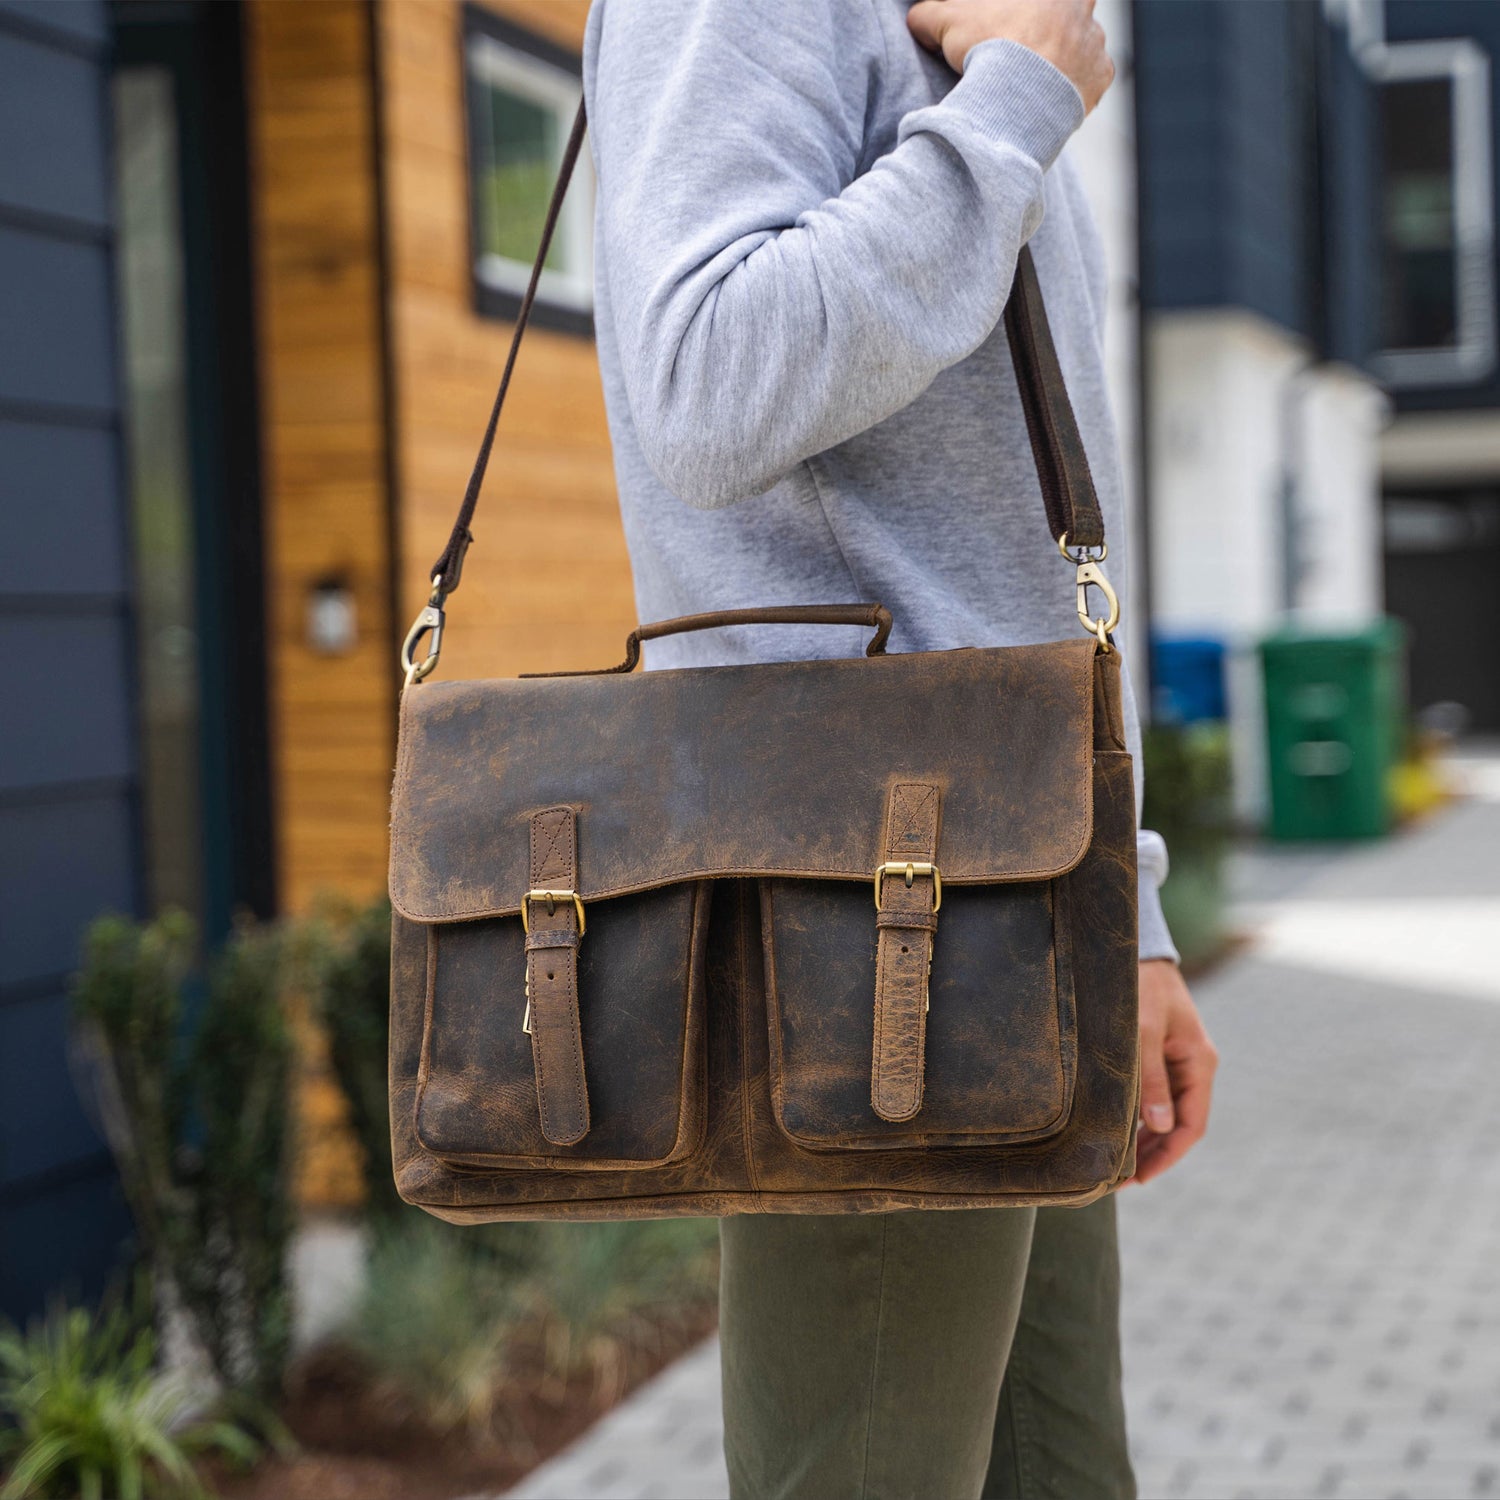 Contact's Leather Small Messenger Bag for Men, Vietnam | Ubuy